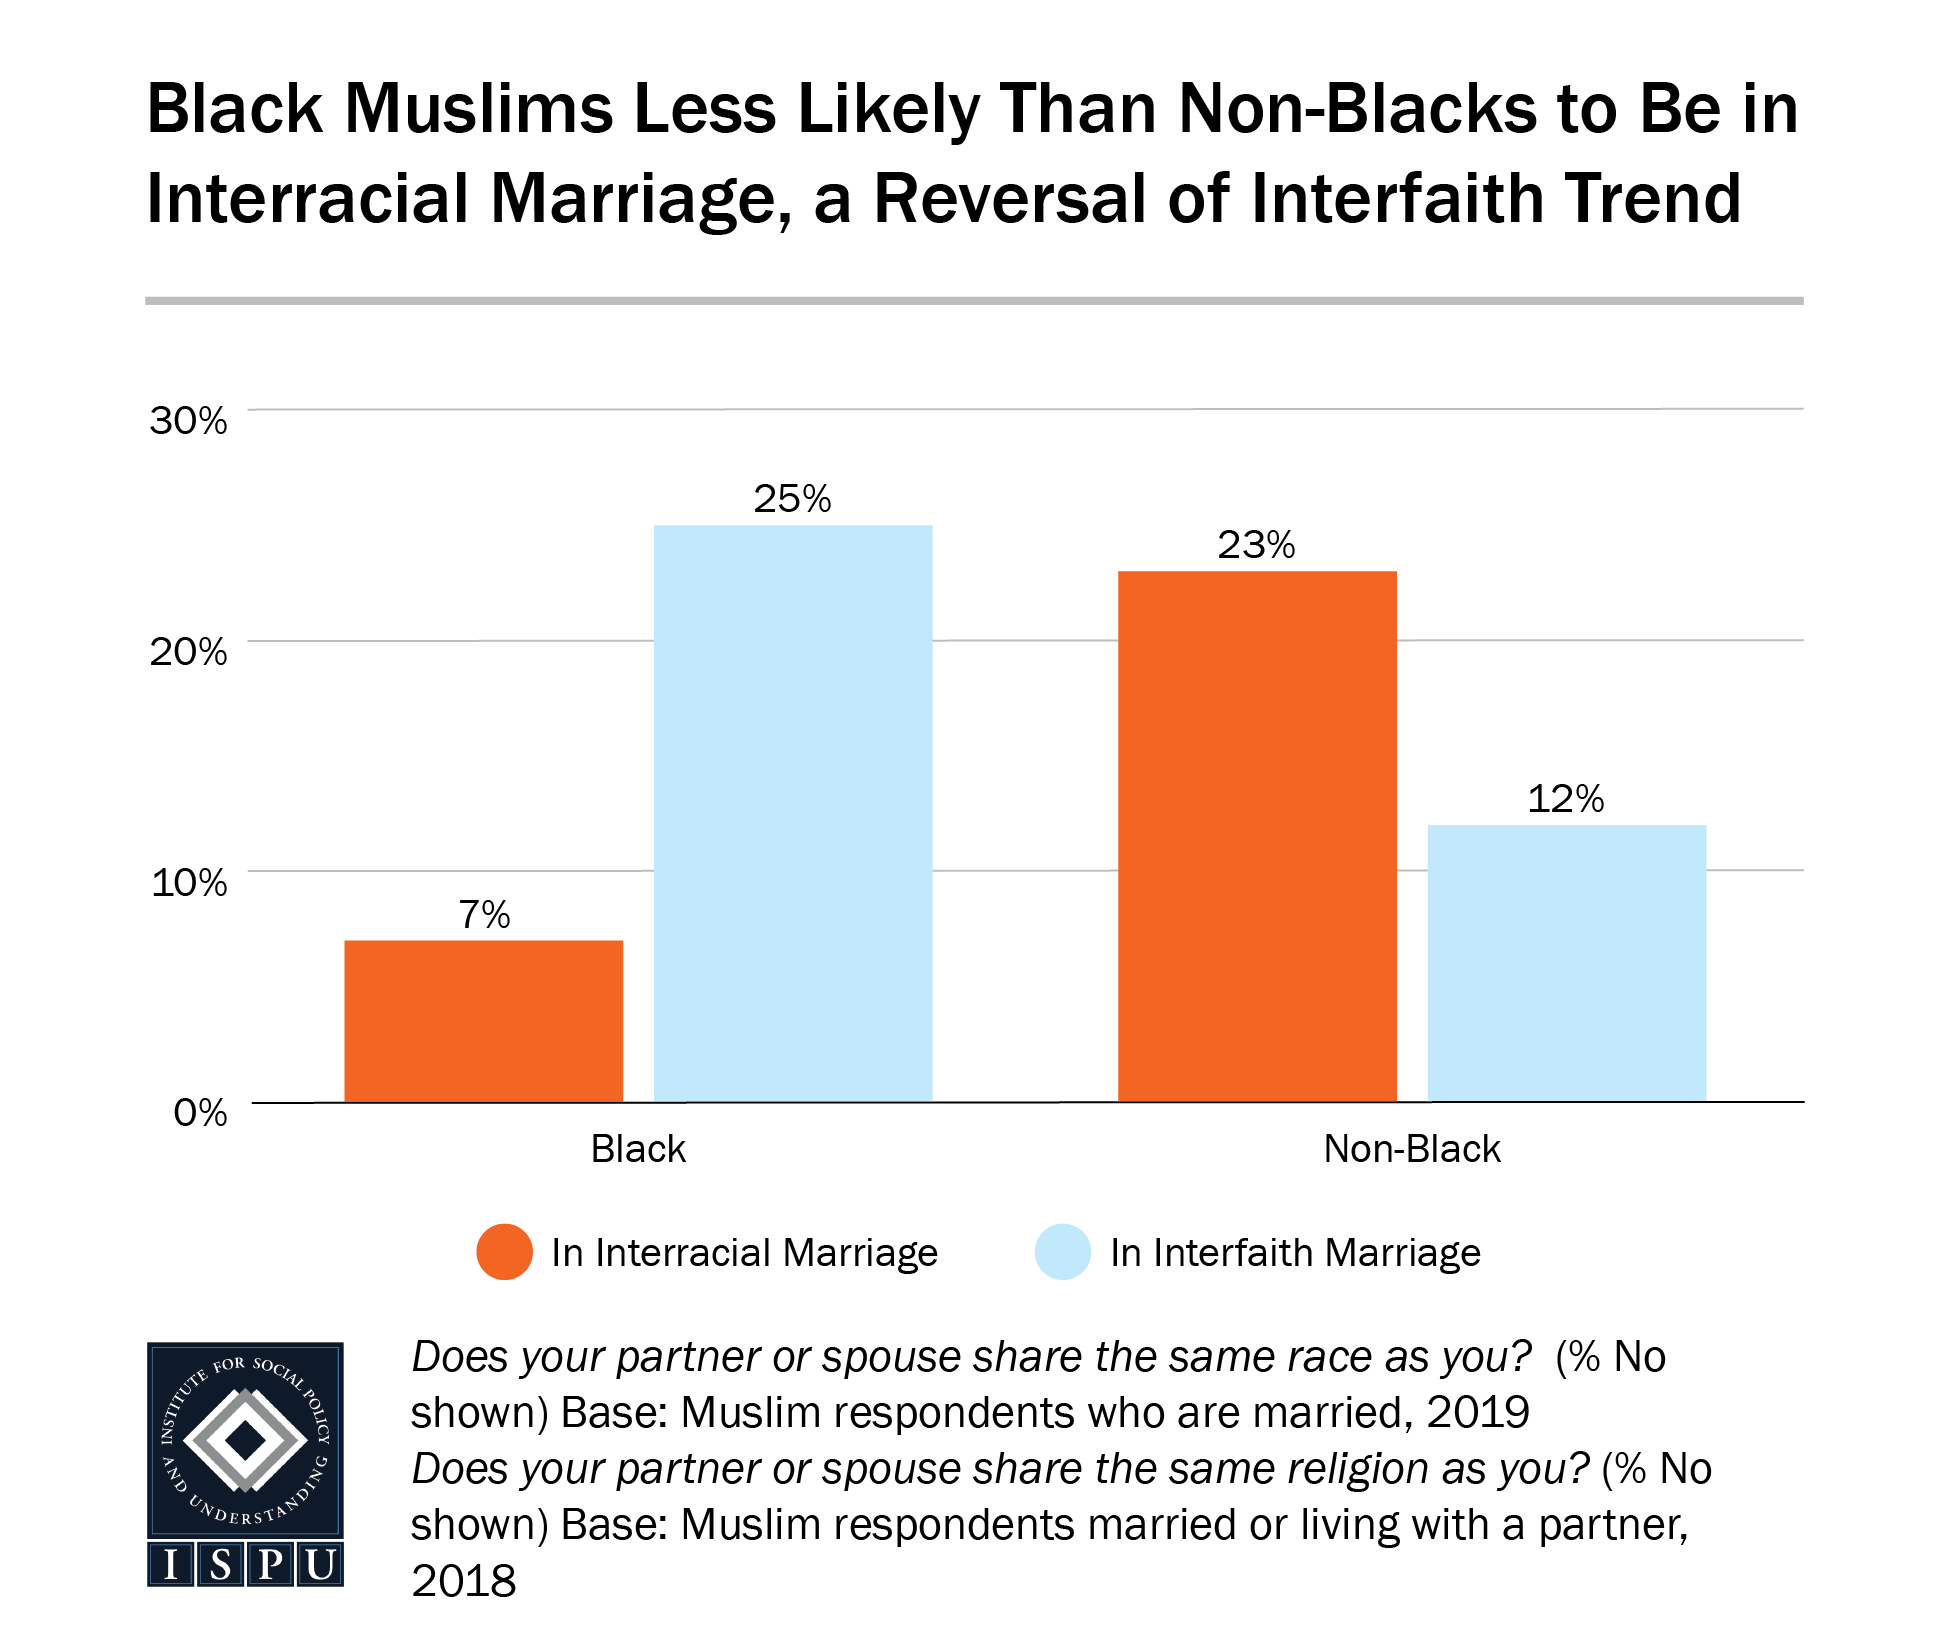 A bar graph showing that Black Muslims are less likely than non-Black Muslims to be in an interracial marriage, a reversal of interfaith trend